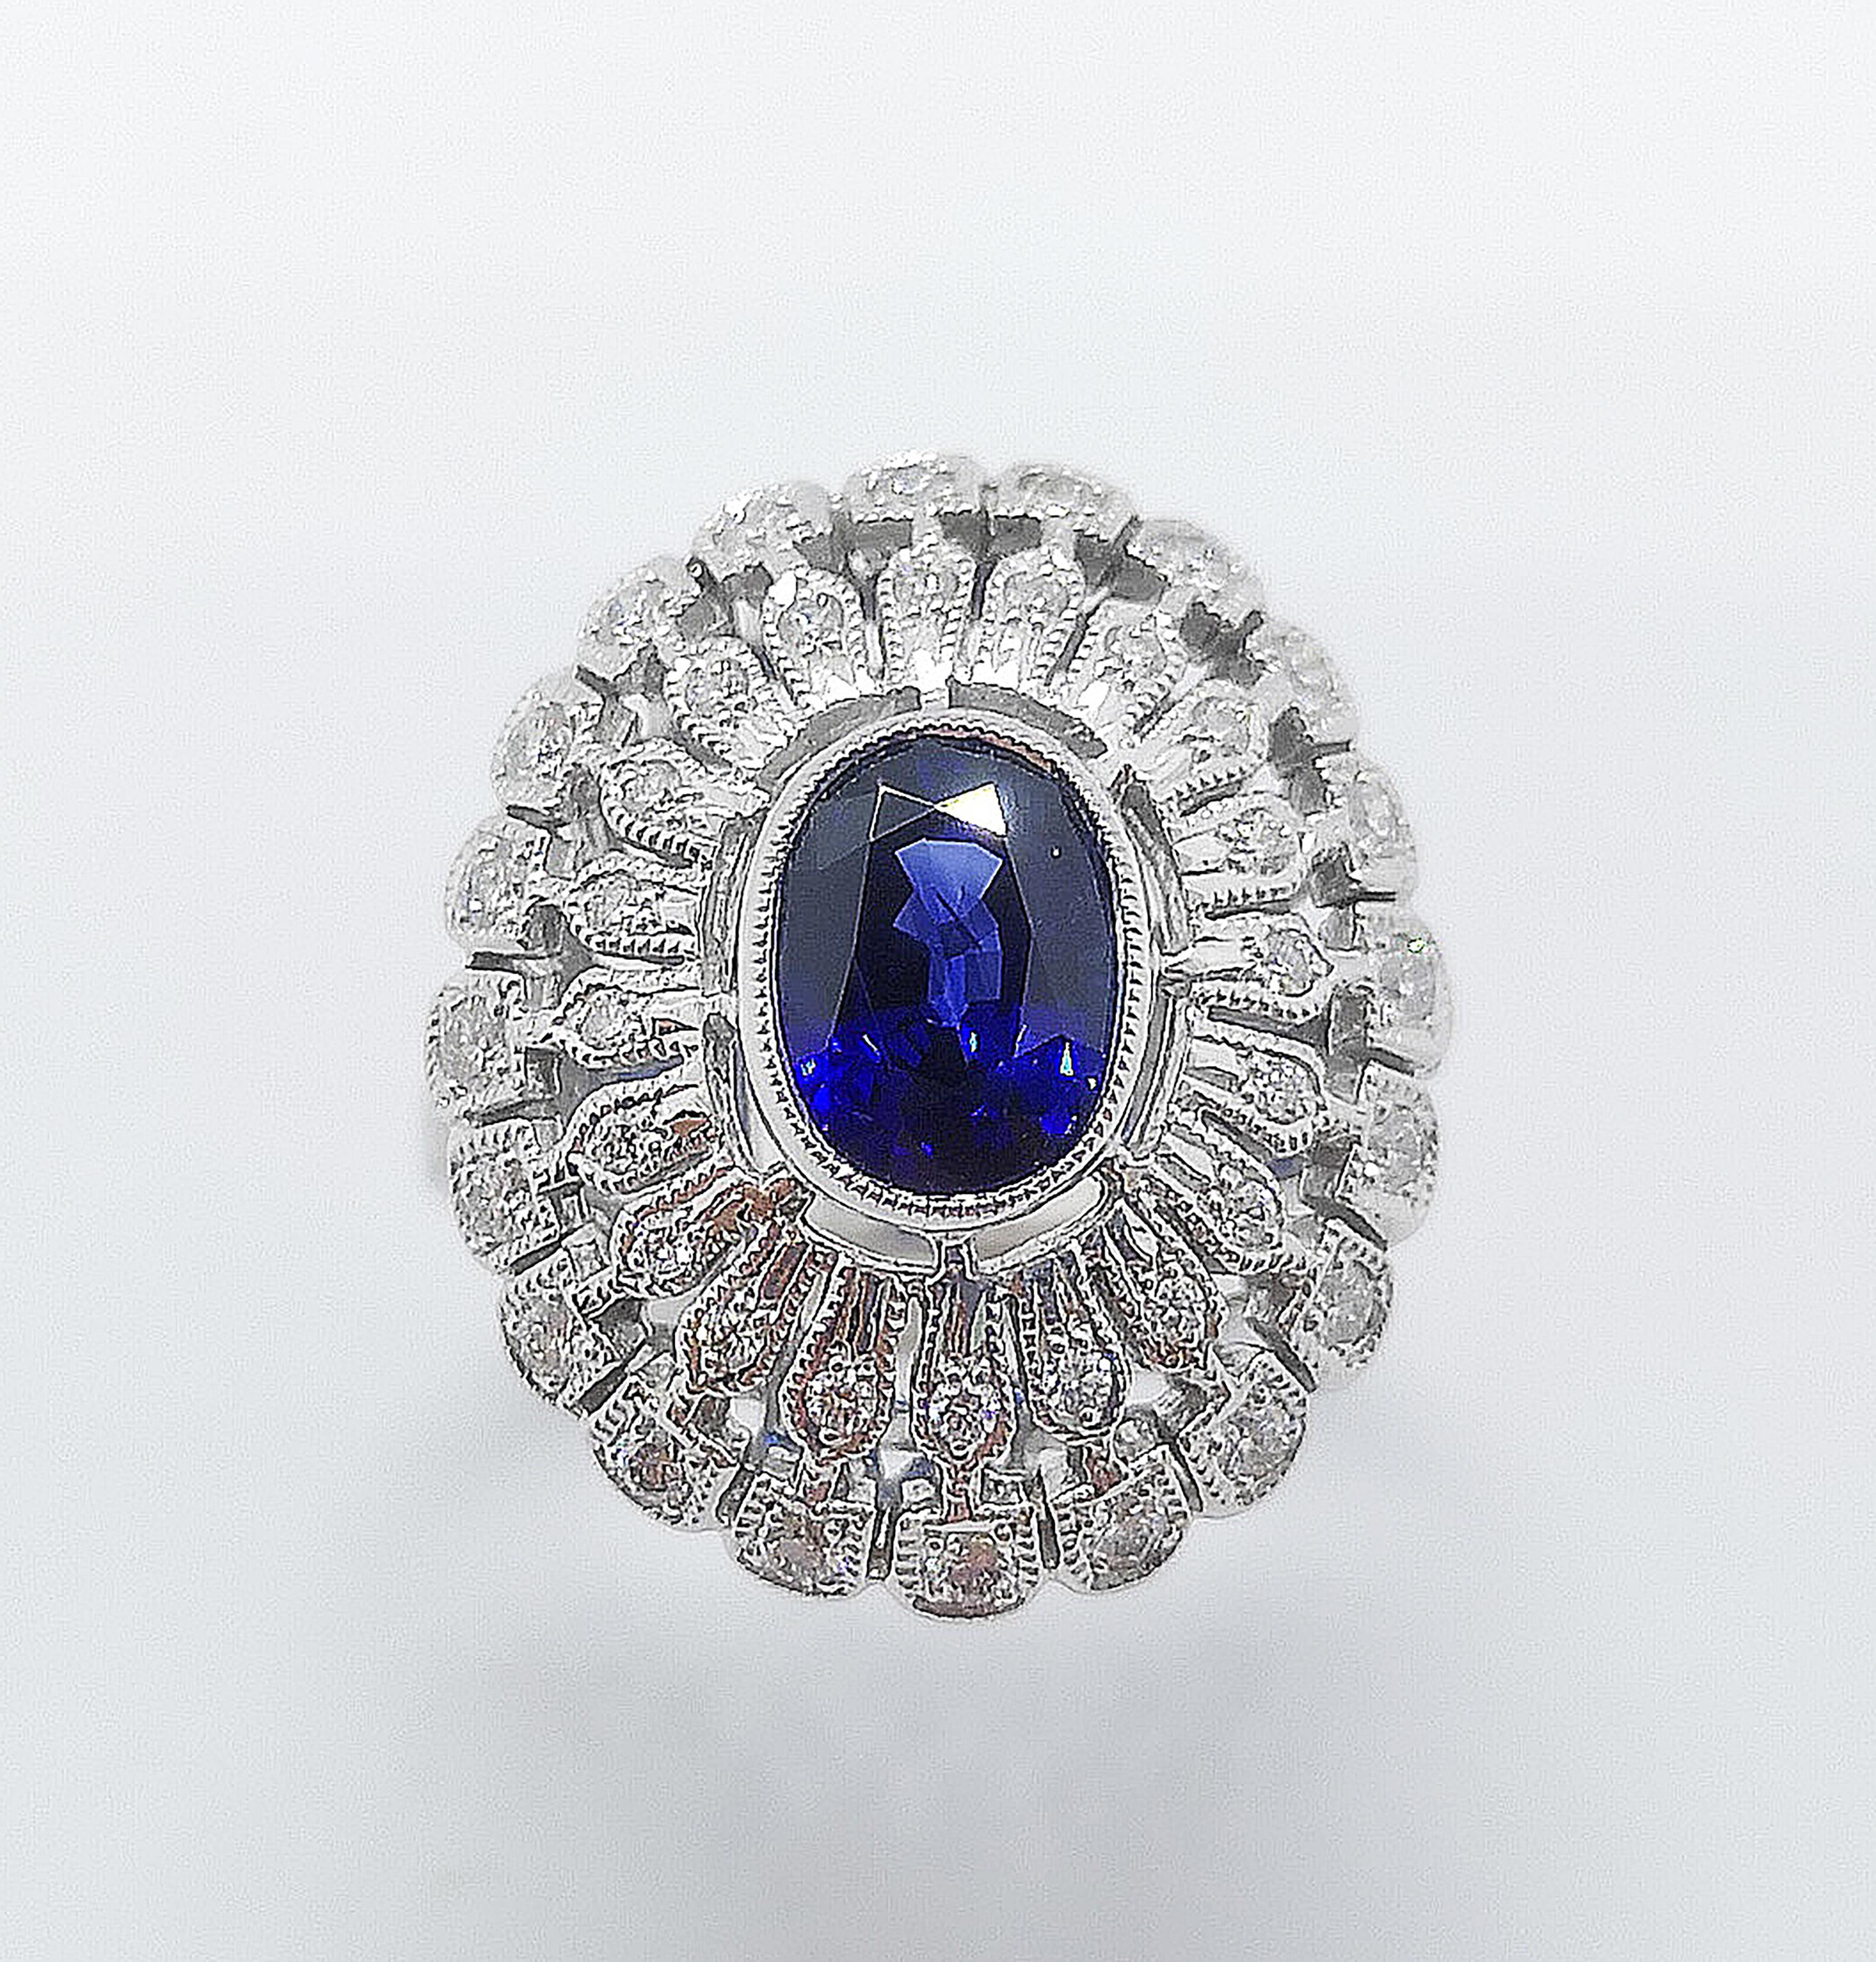 Blue Sapphire 2.06 carats with Diamond 0.52 carat Ring set in 18 Karat White Gold Settings

Width:  1.7 cm 
Length: 2.1 cm
Ring Size: 53
Total Weight: 10.46 grams

